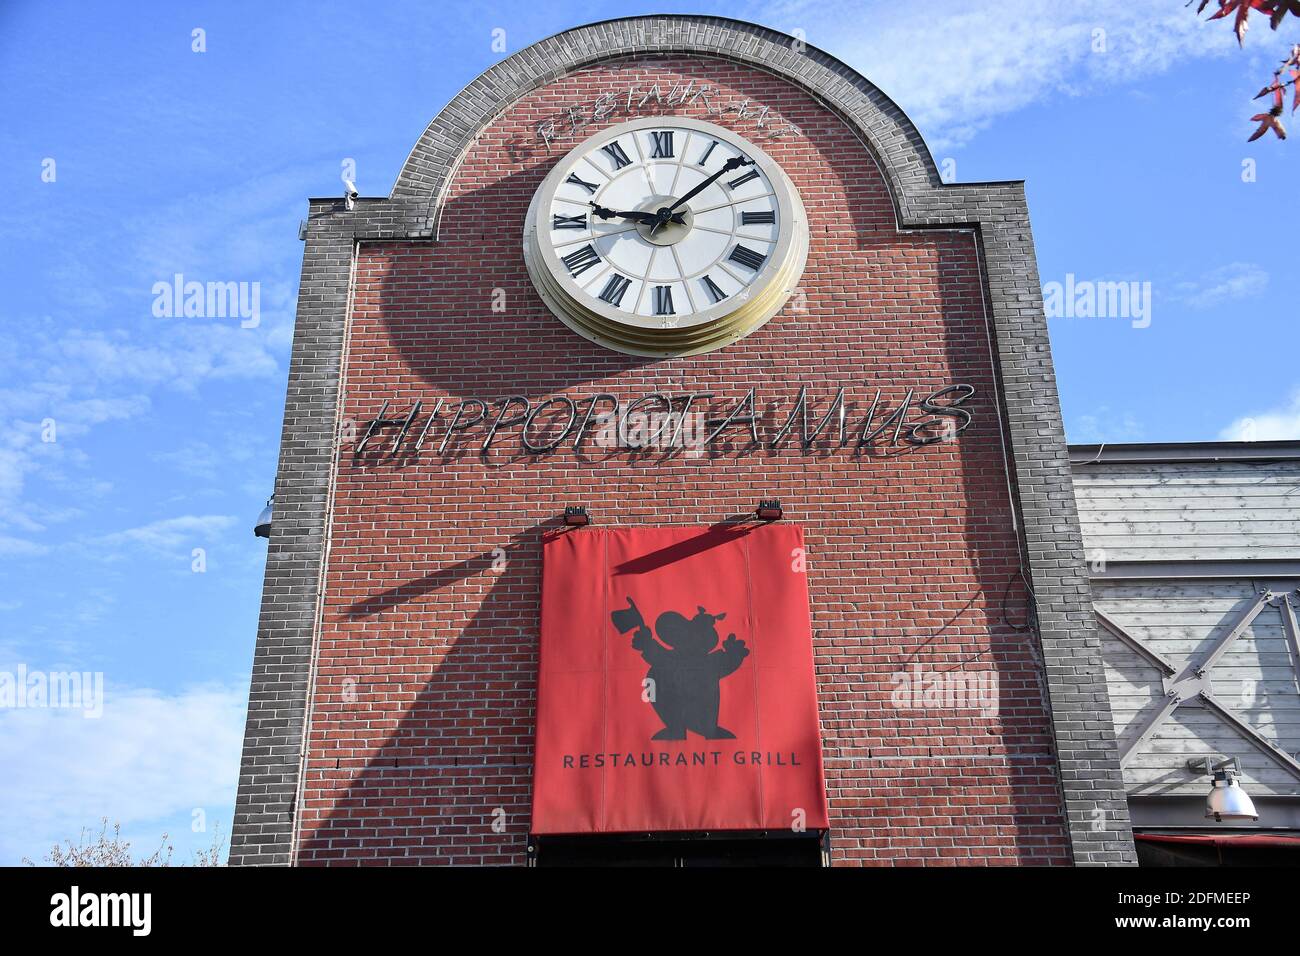 A shop sign of HIPPOPOTAMUS restaurant, on November 14, 2020 in Bonneuil sur Marne, FRANCE. Photo by David Niviere/ABACAPRESS.COM Stock Photo